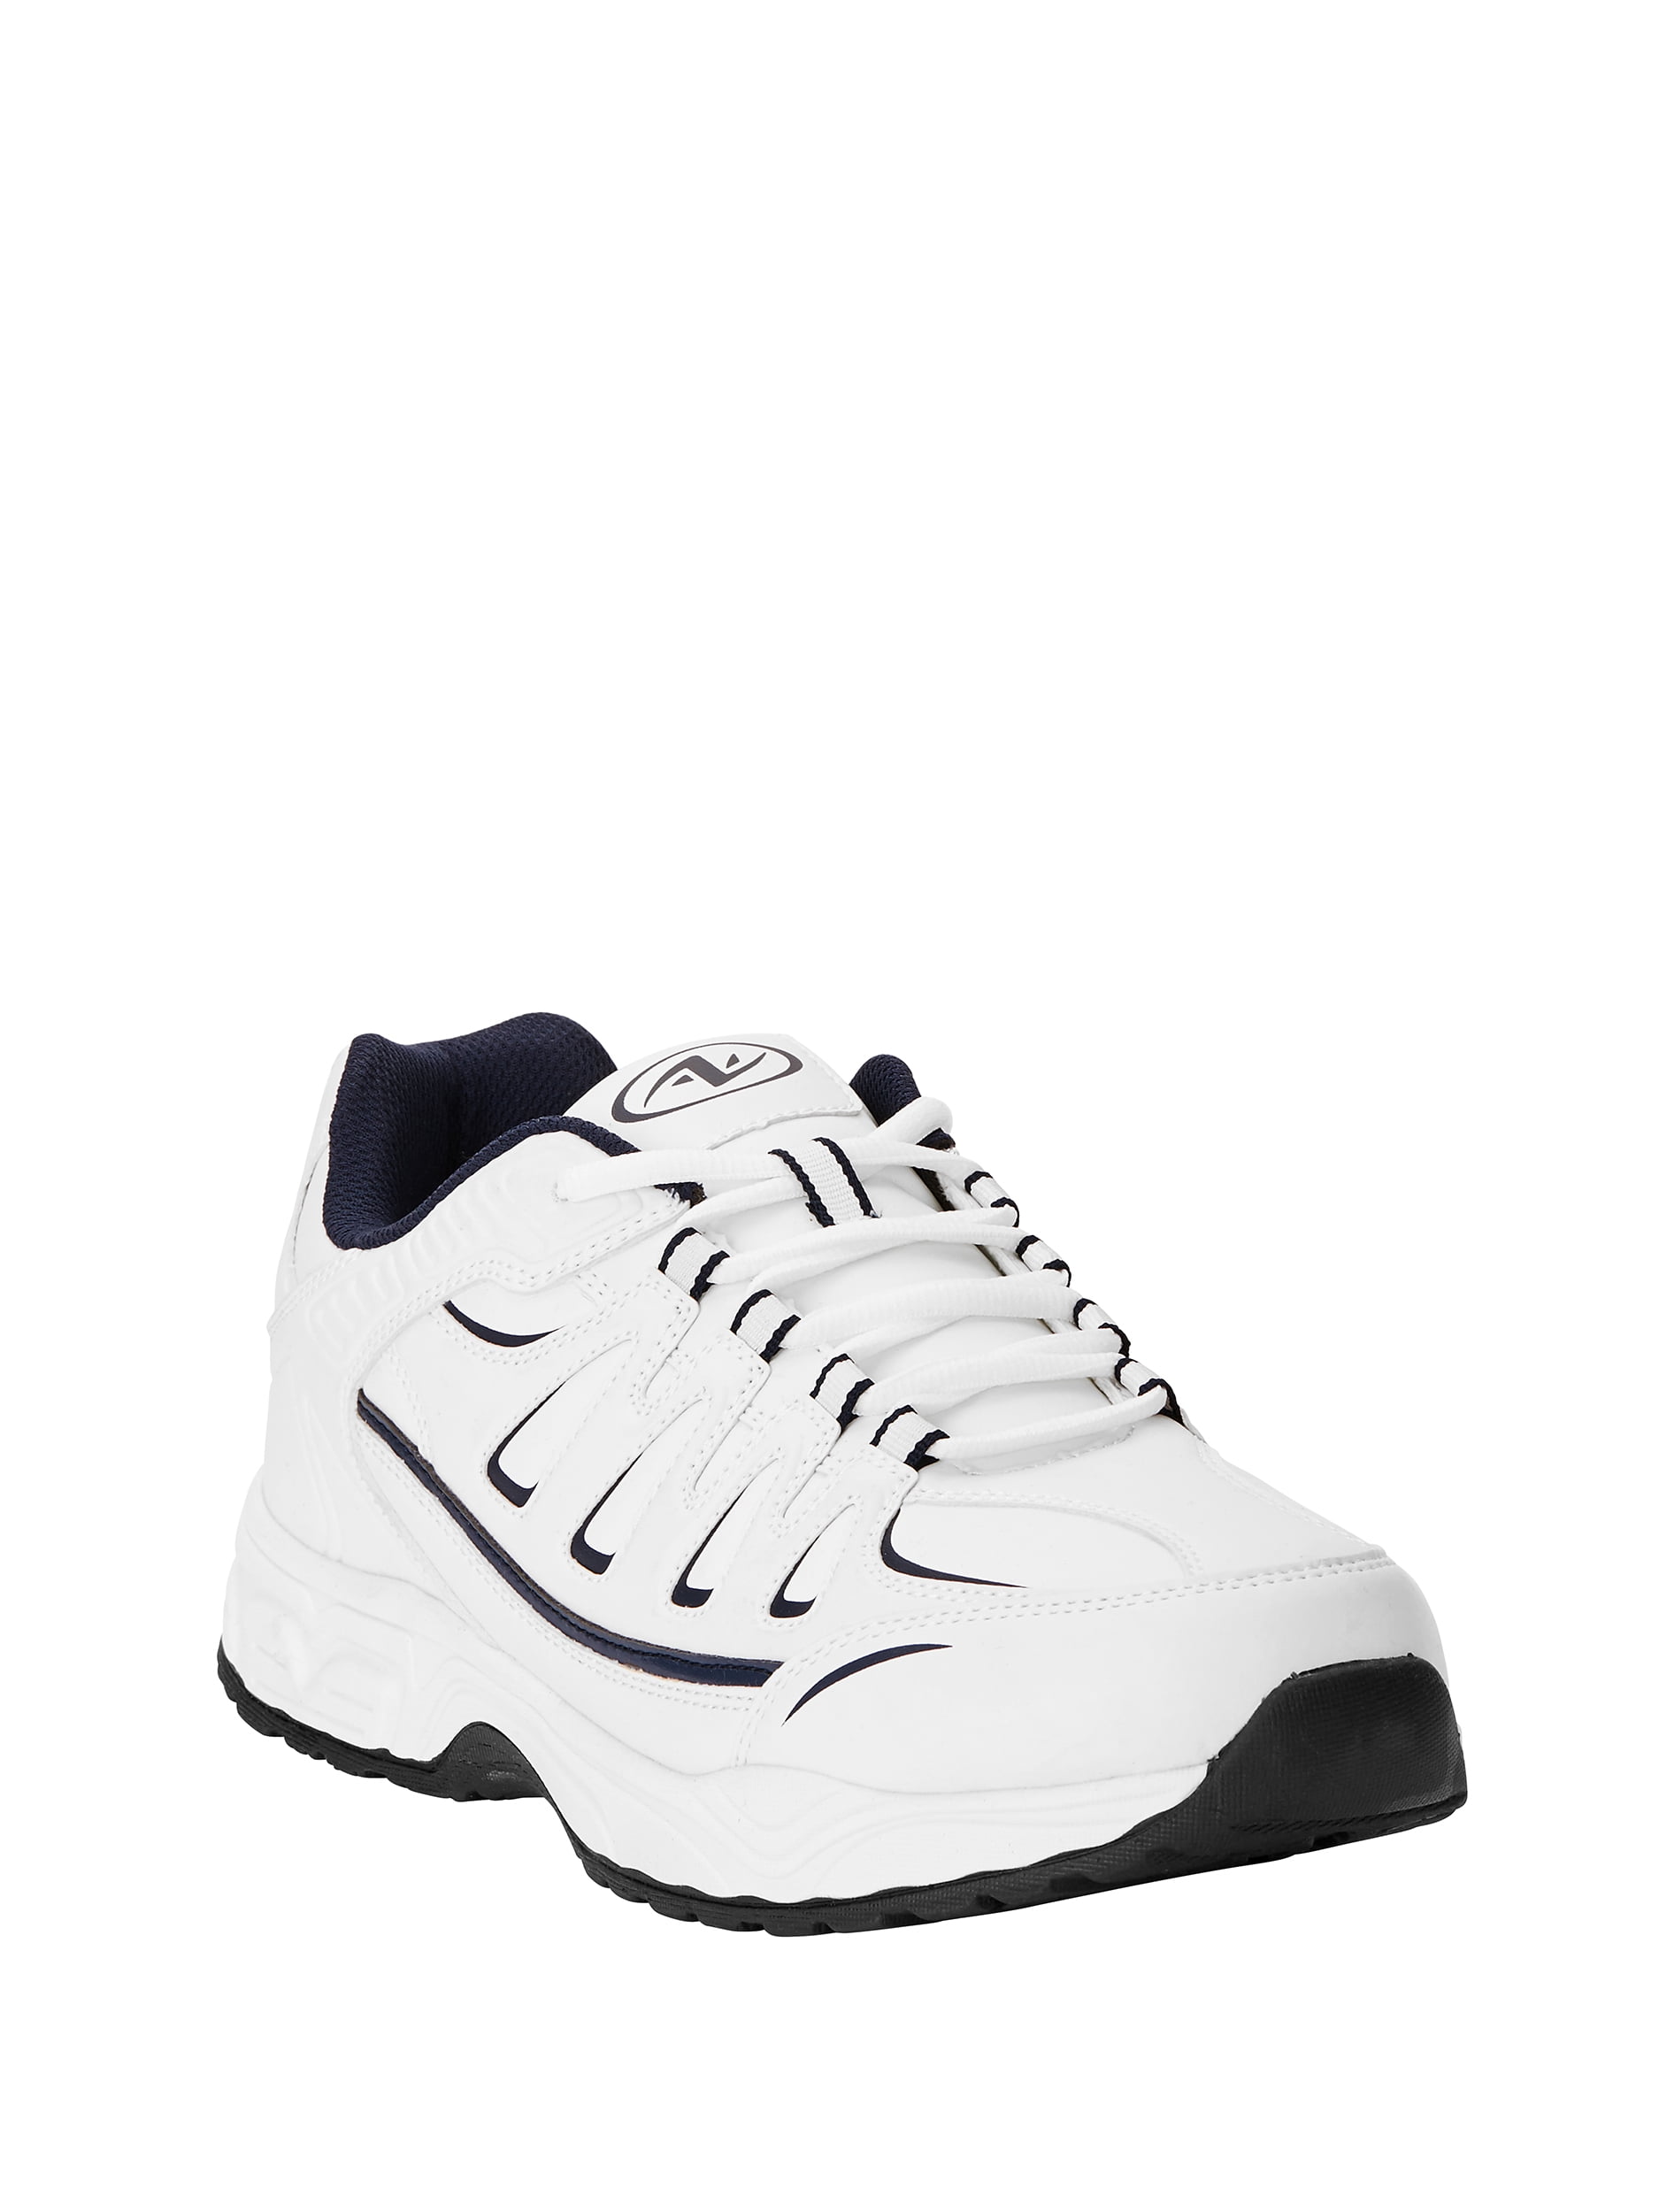 Athletic Works Chunky Athletic Shoe (Men's and Men's Wide Width ...